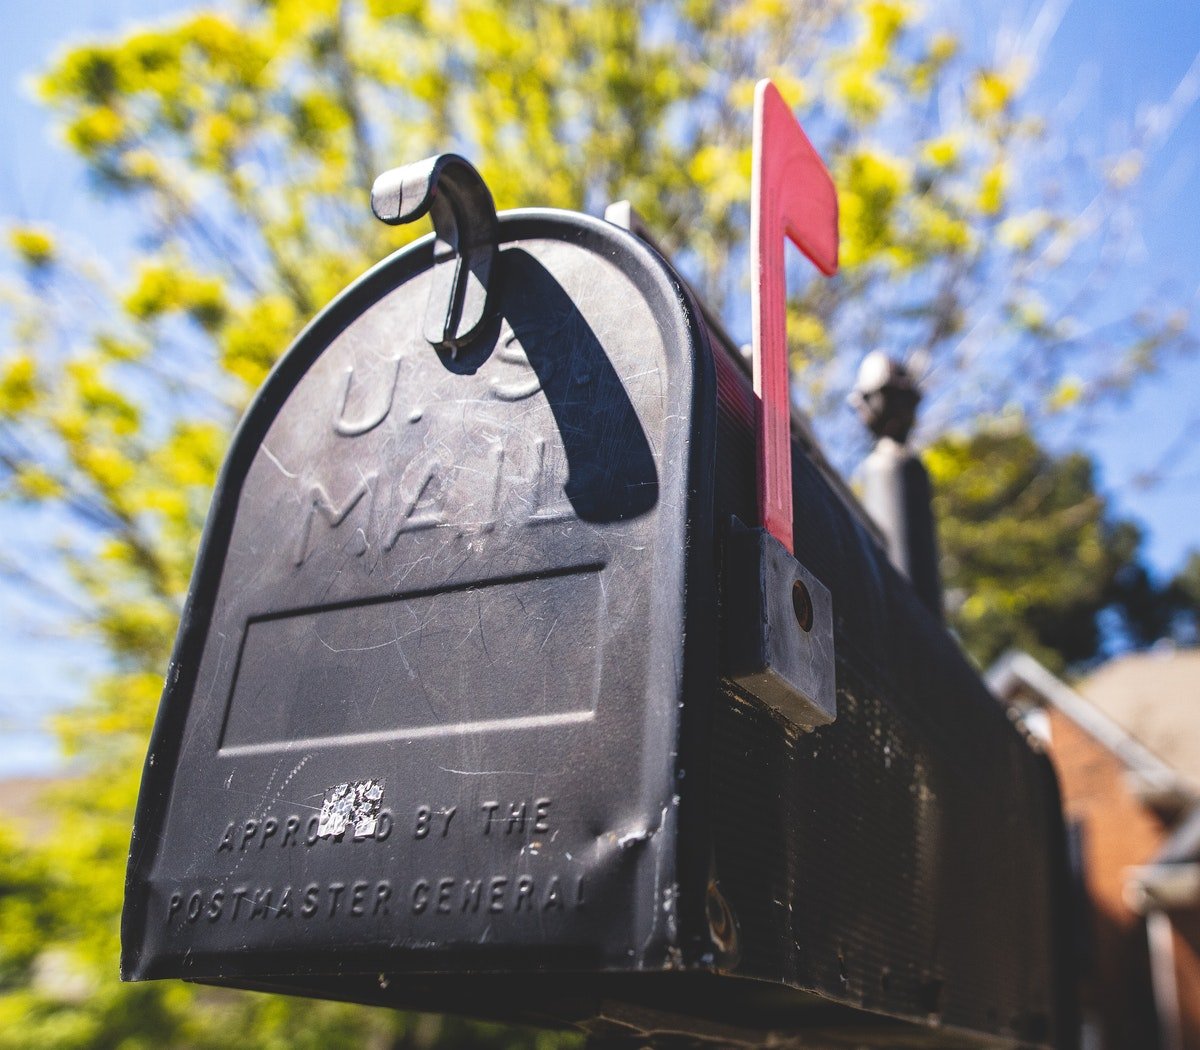 5 tips for building an effective direct marketing campaign.